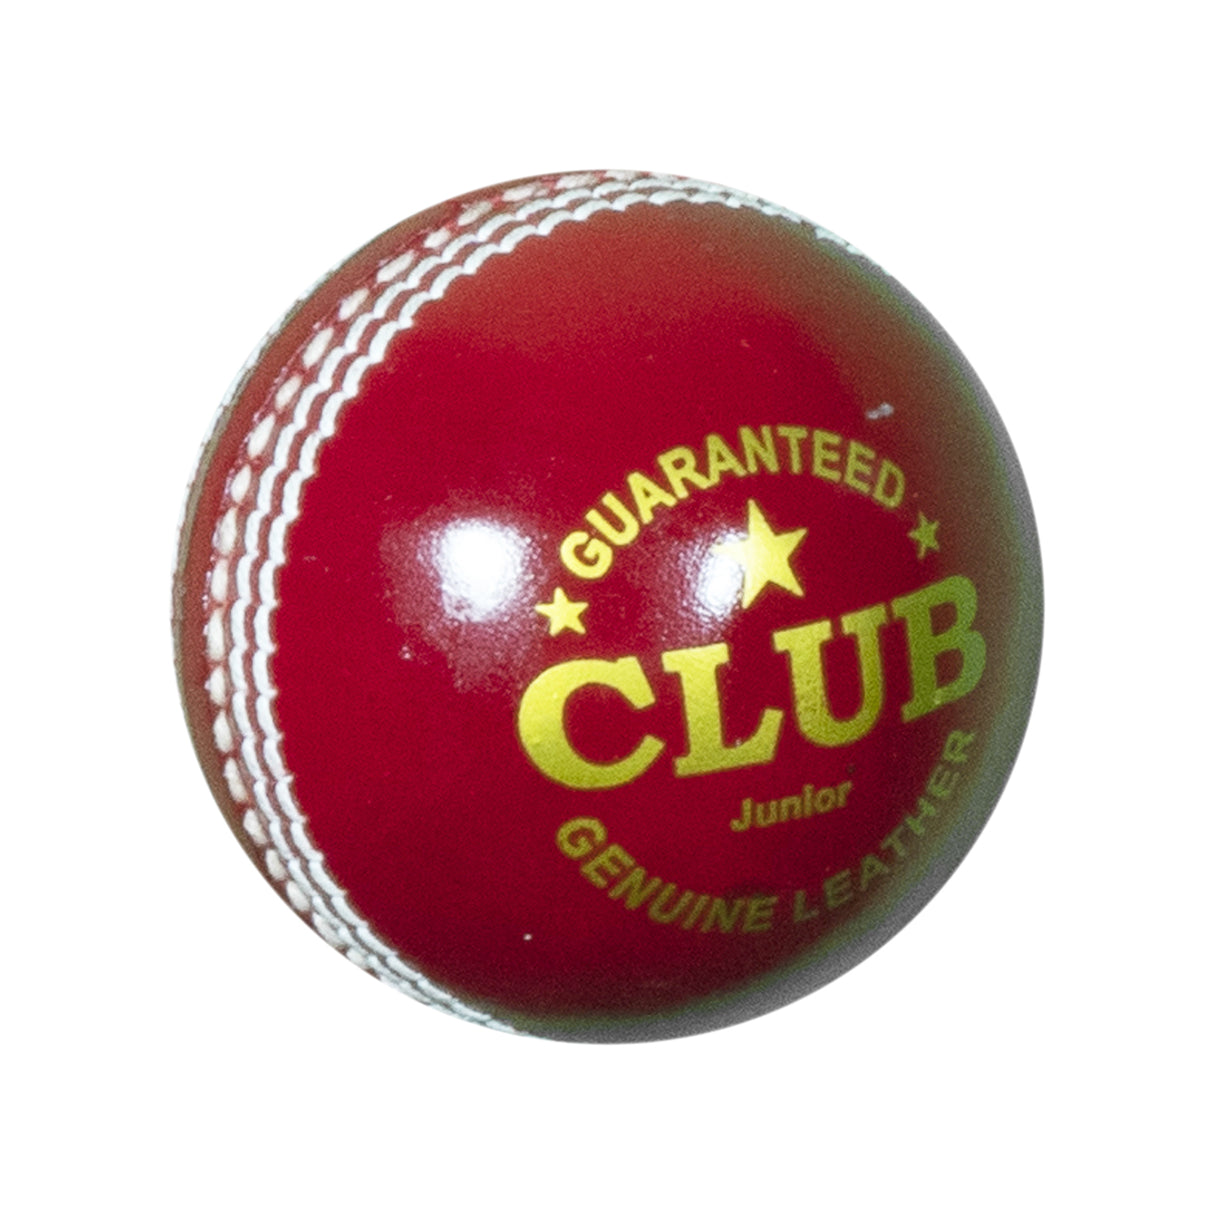 DS Club Leather Cricket Ball